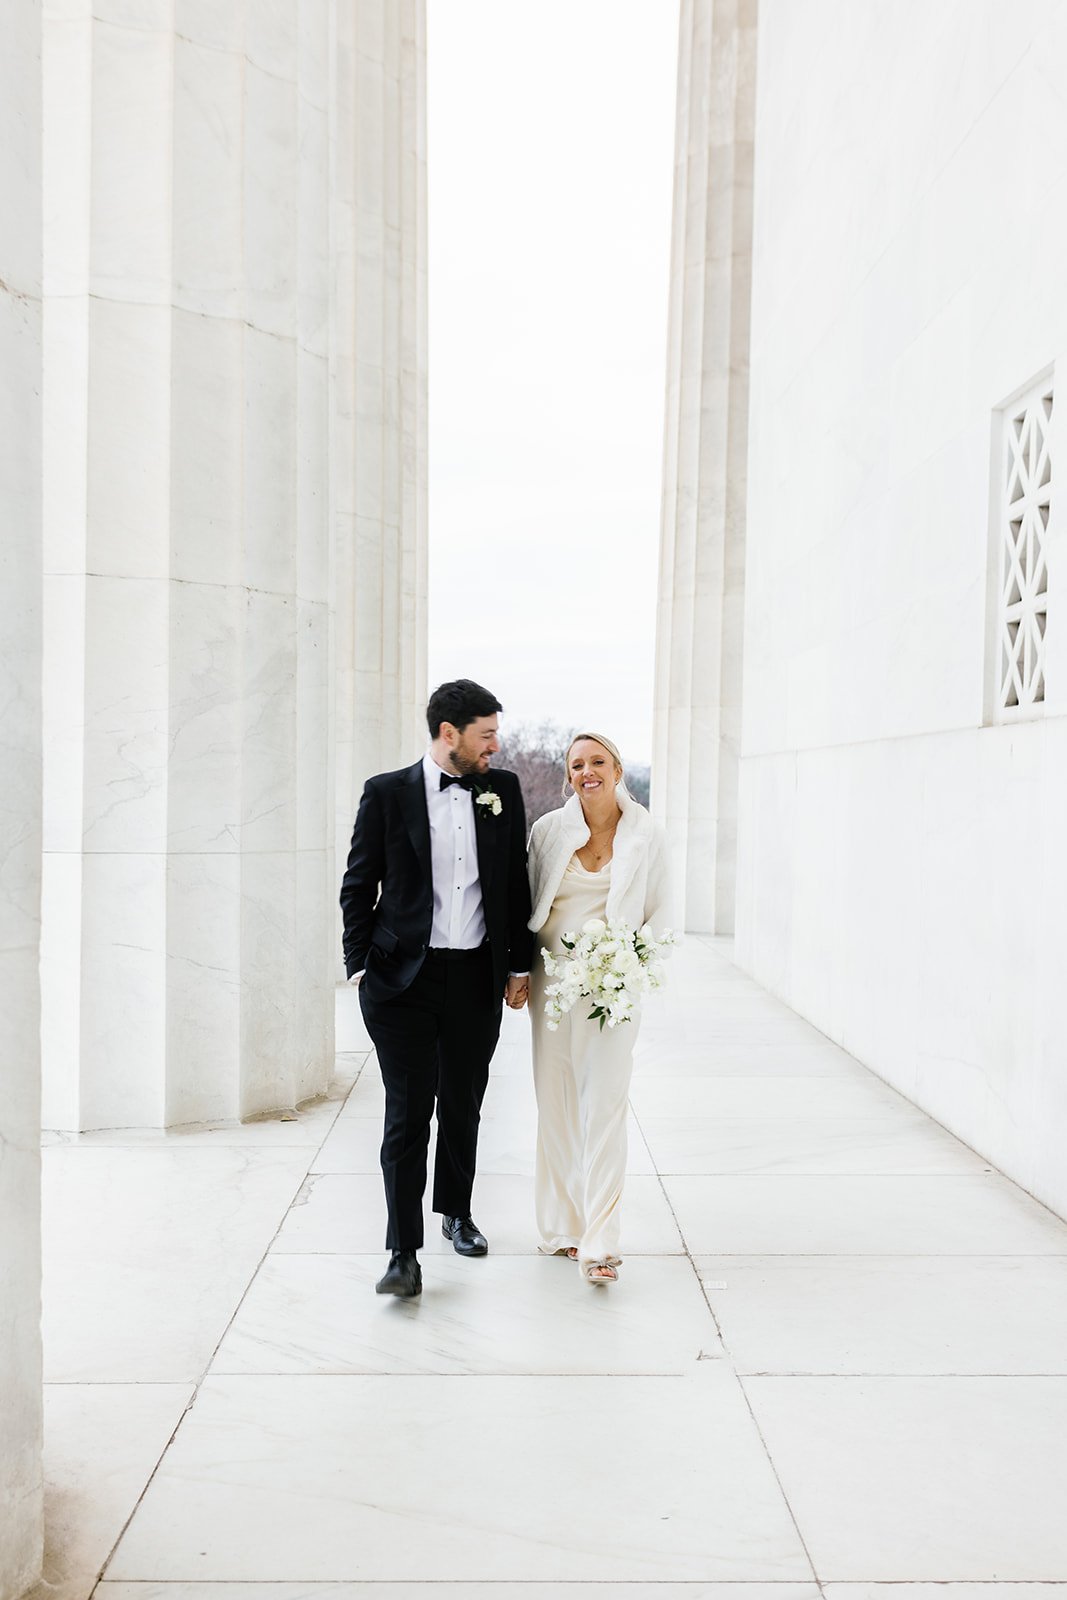 Bride and groom take photos at the Washington Monuments at the National Mall